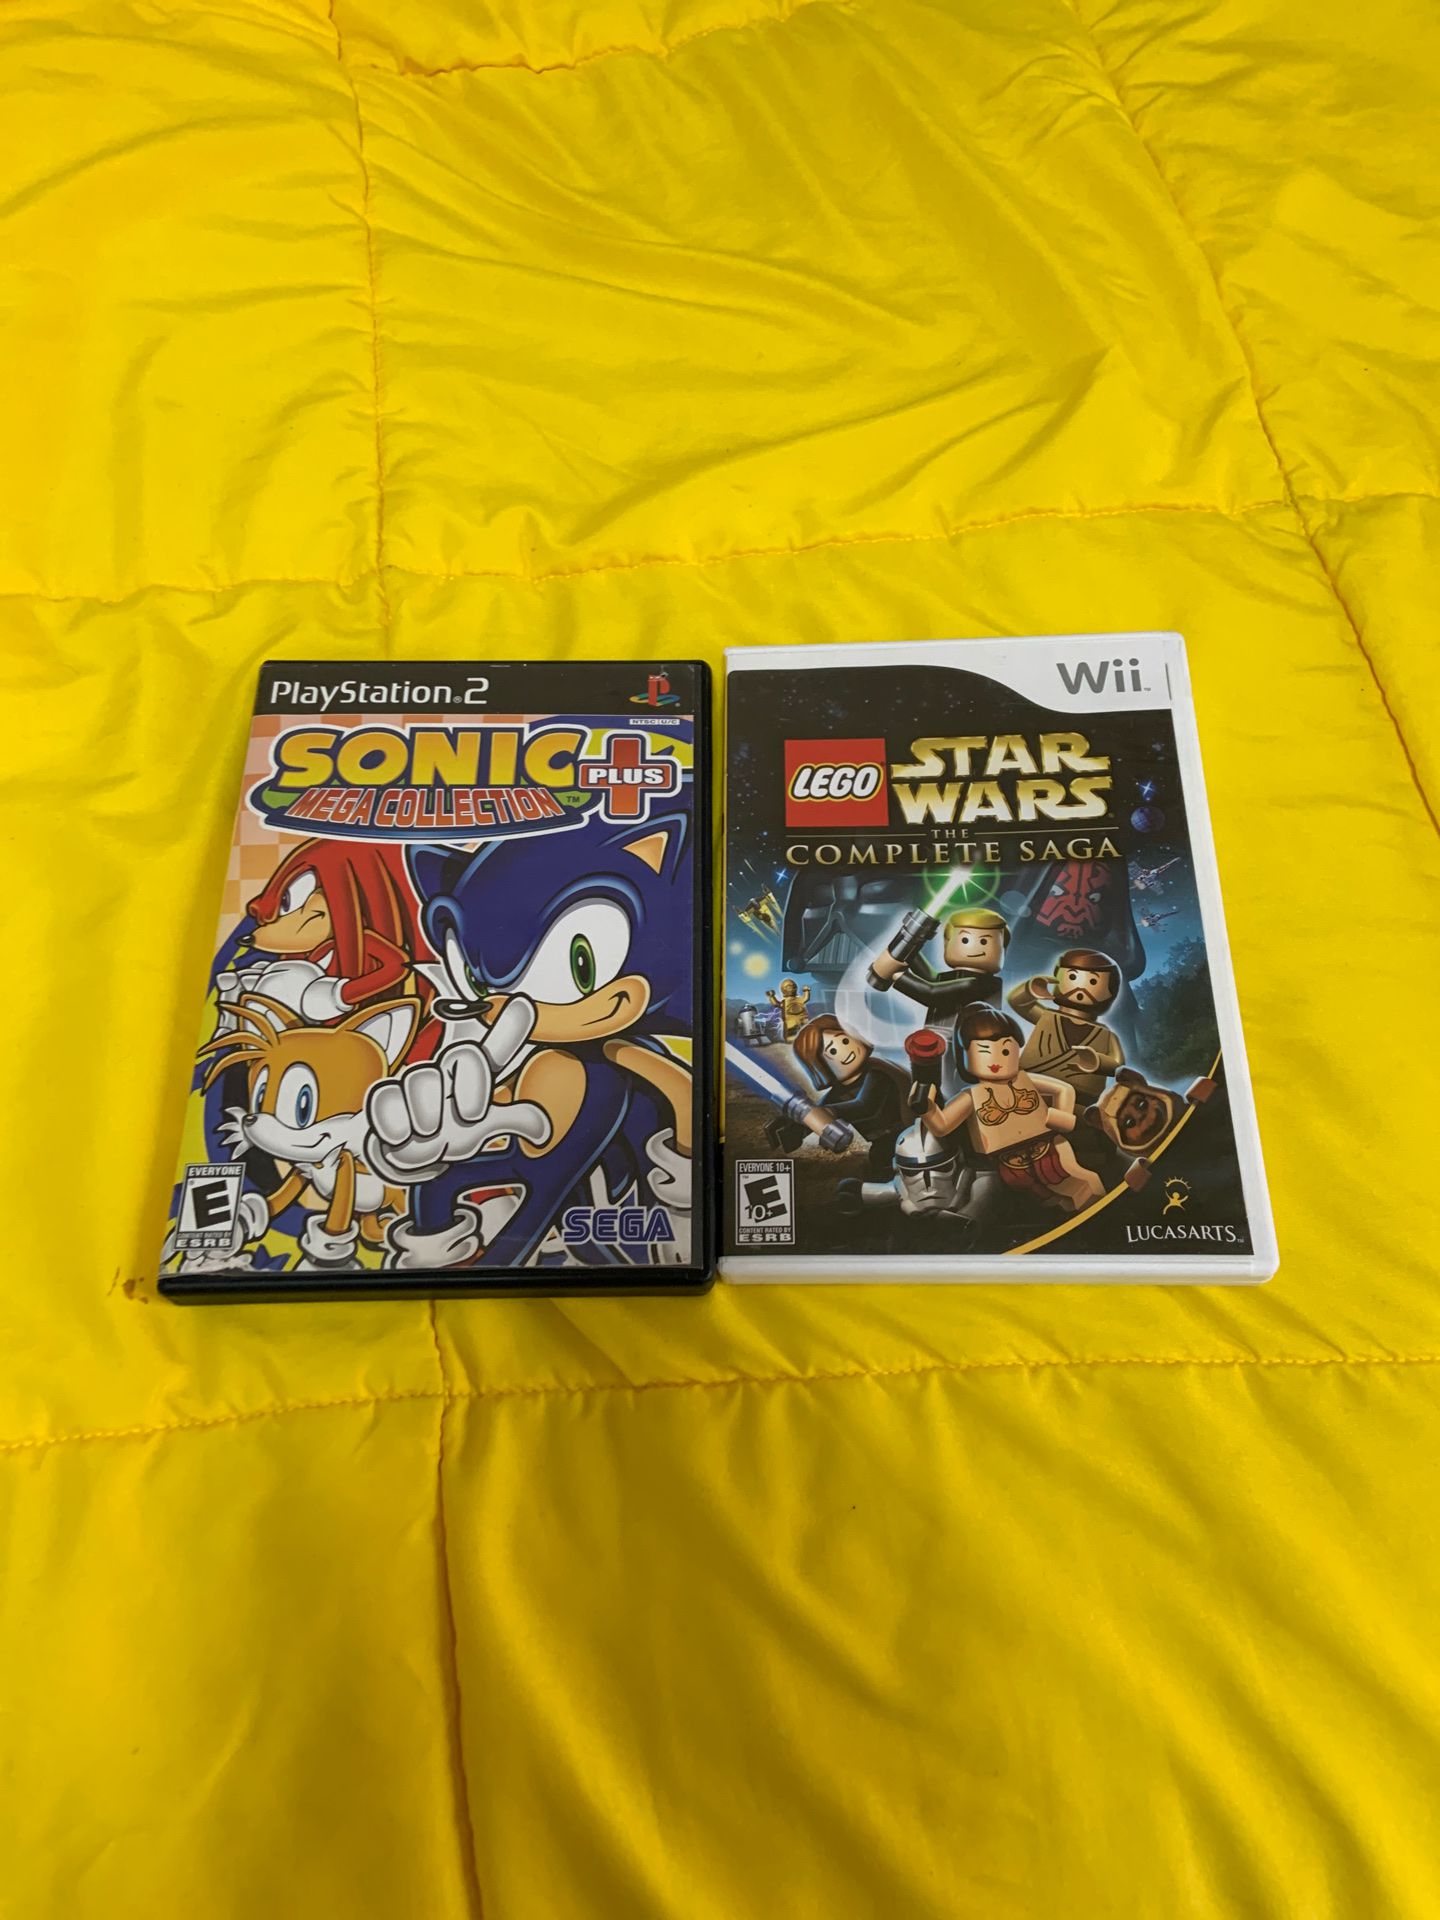 Ps2 and wii game ($20 each)